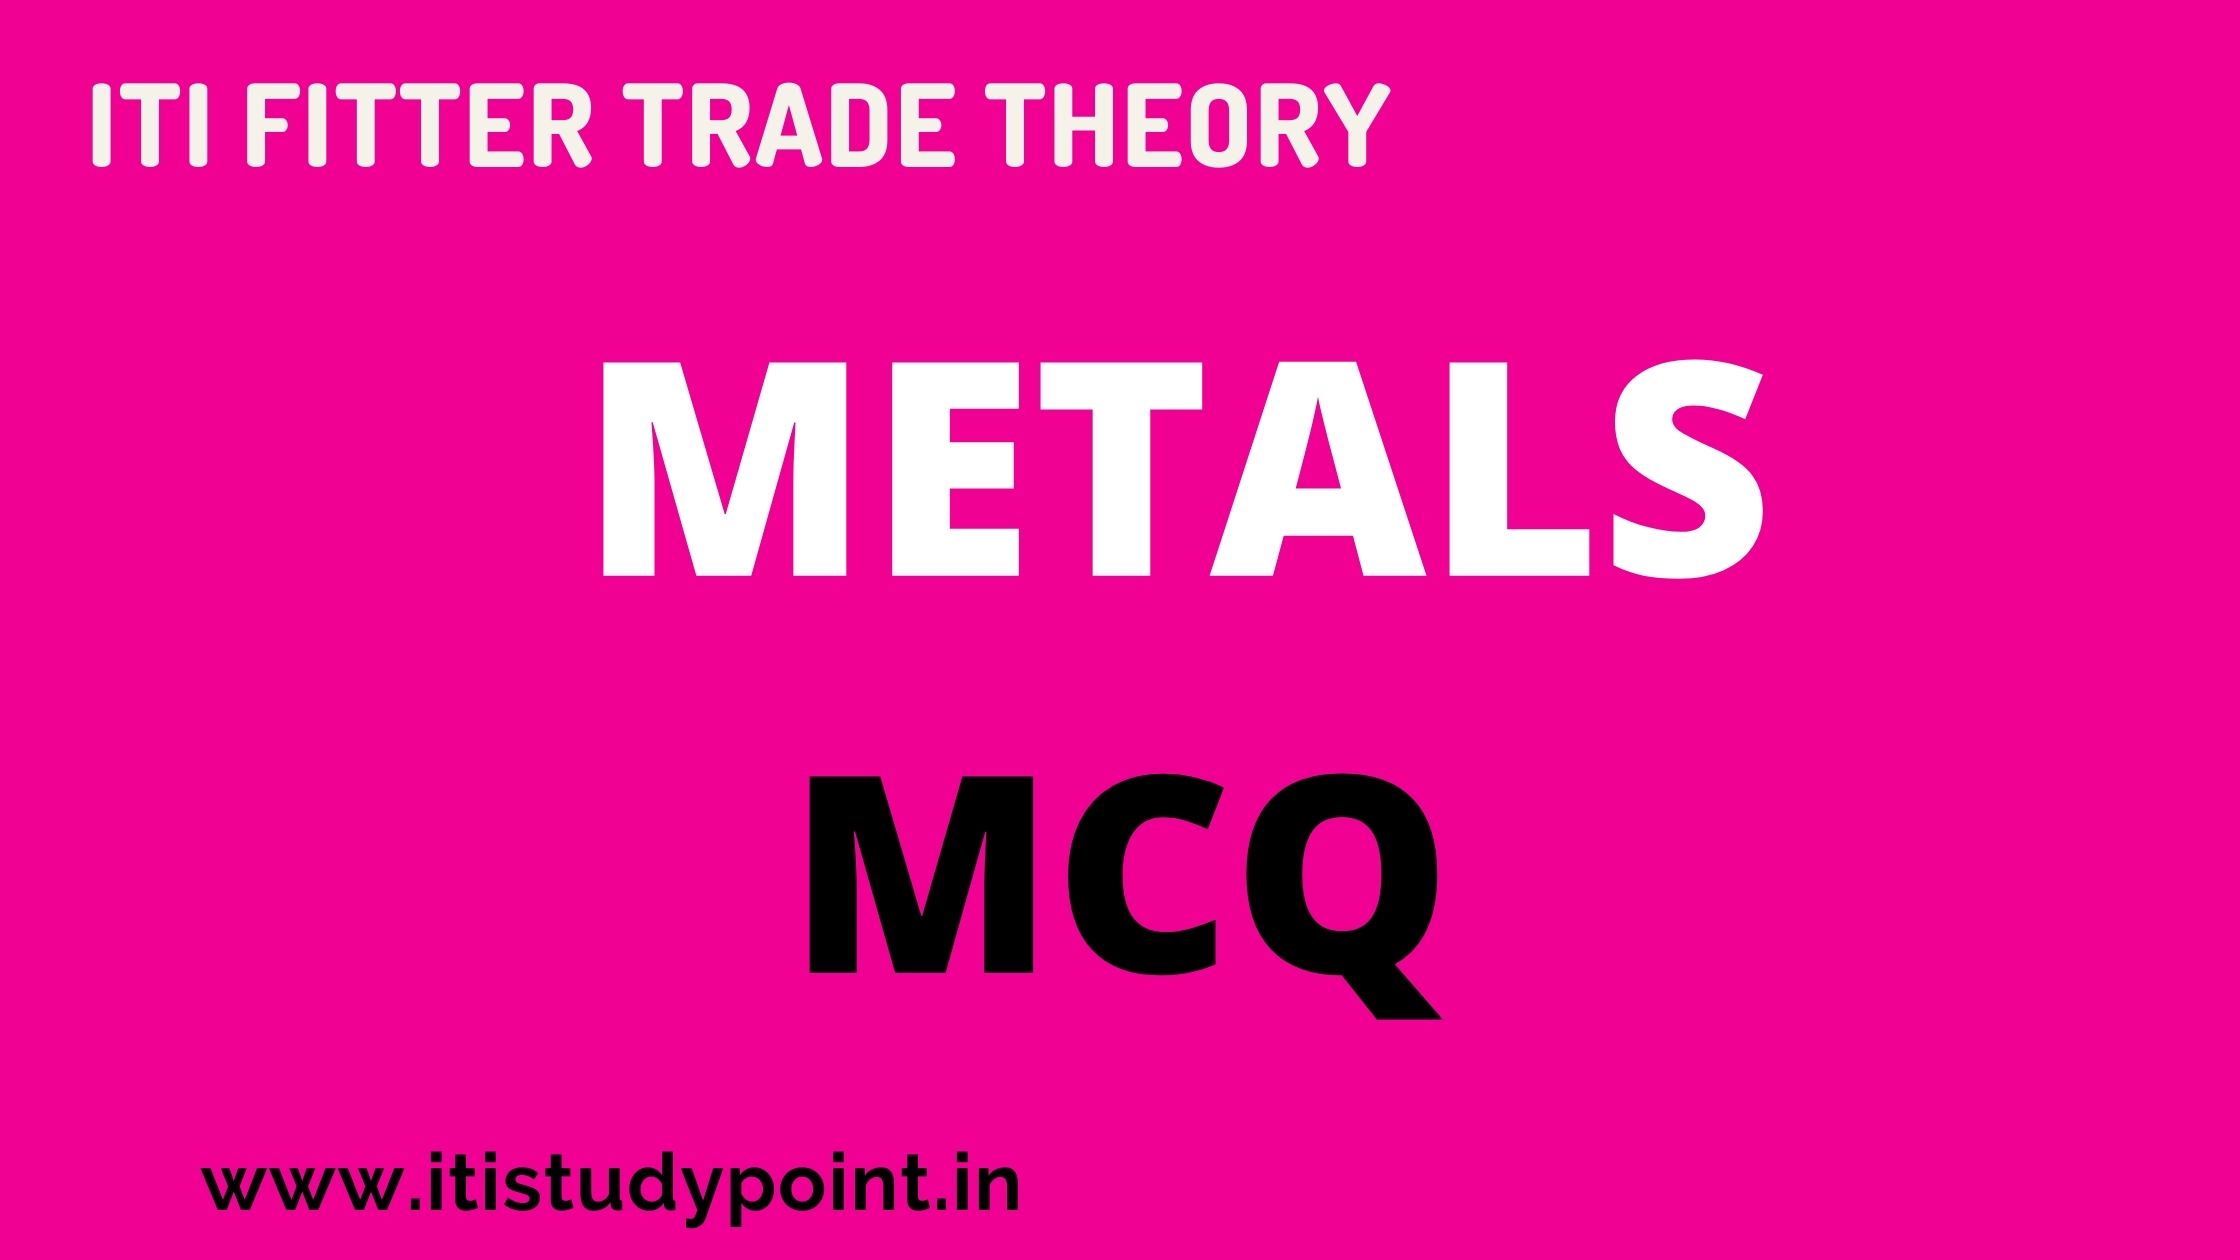 METALS MCQ- ITI Fitter Trade Theory